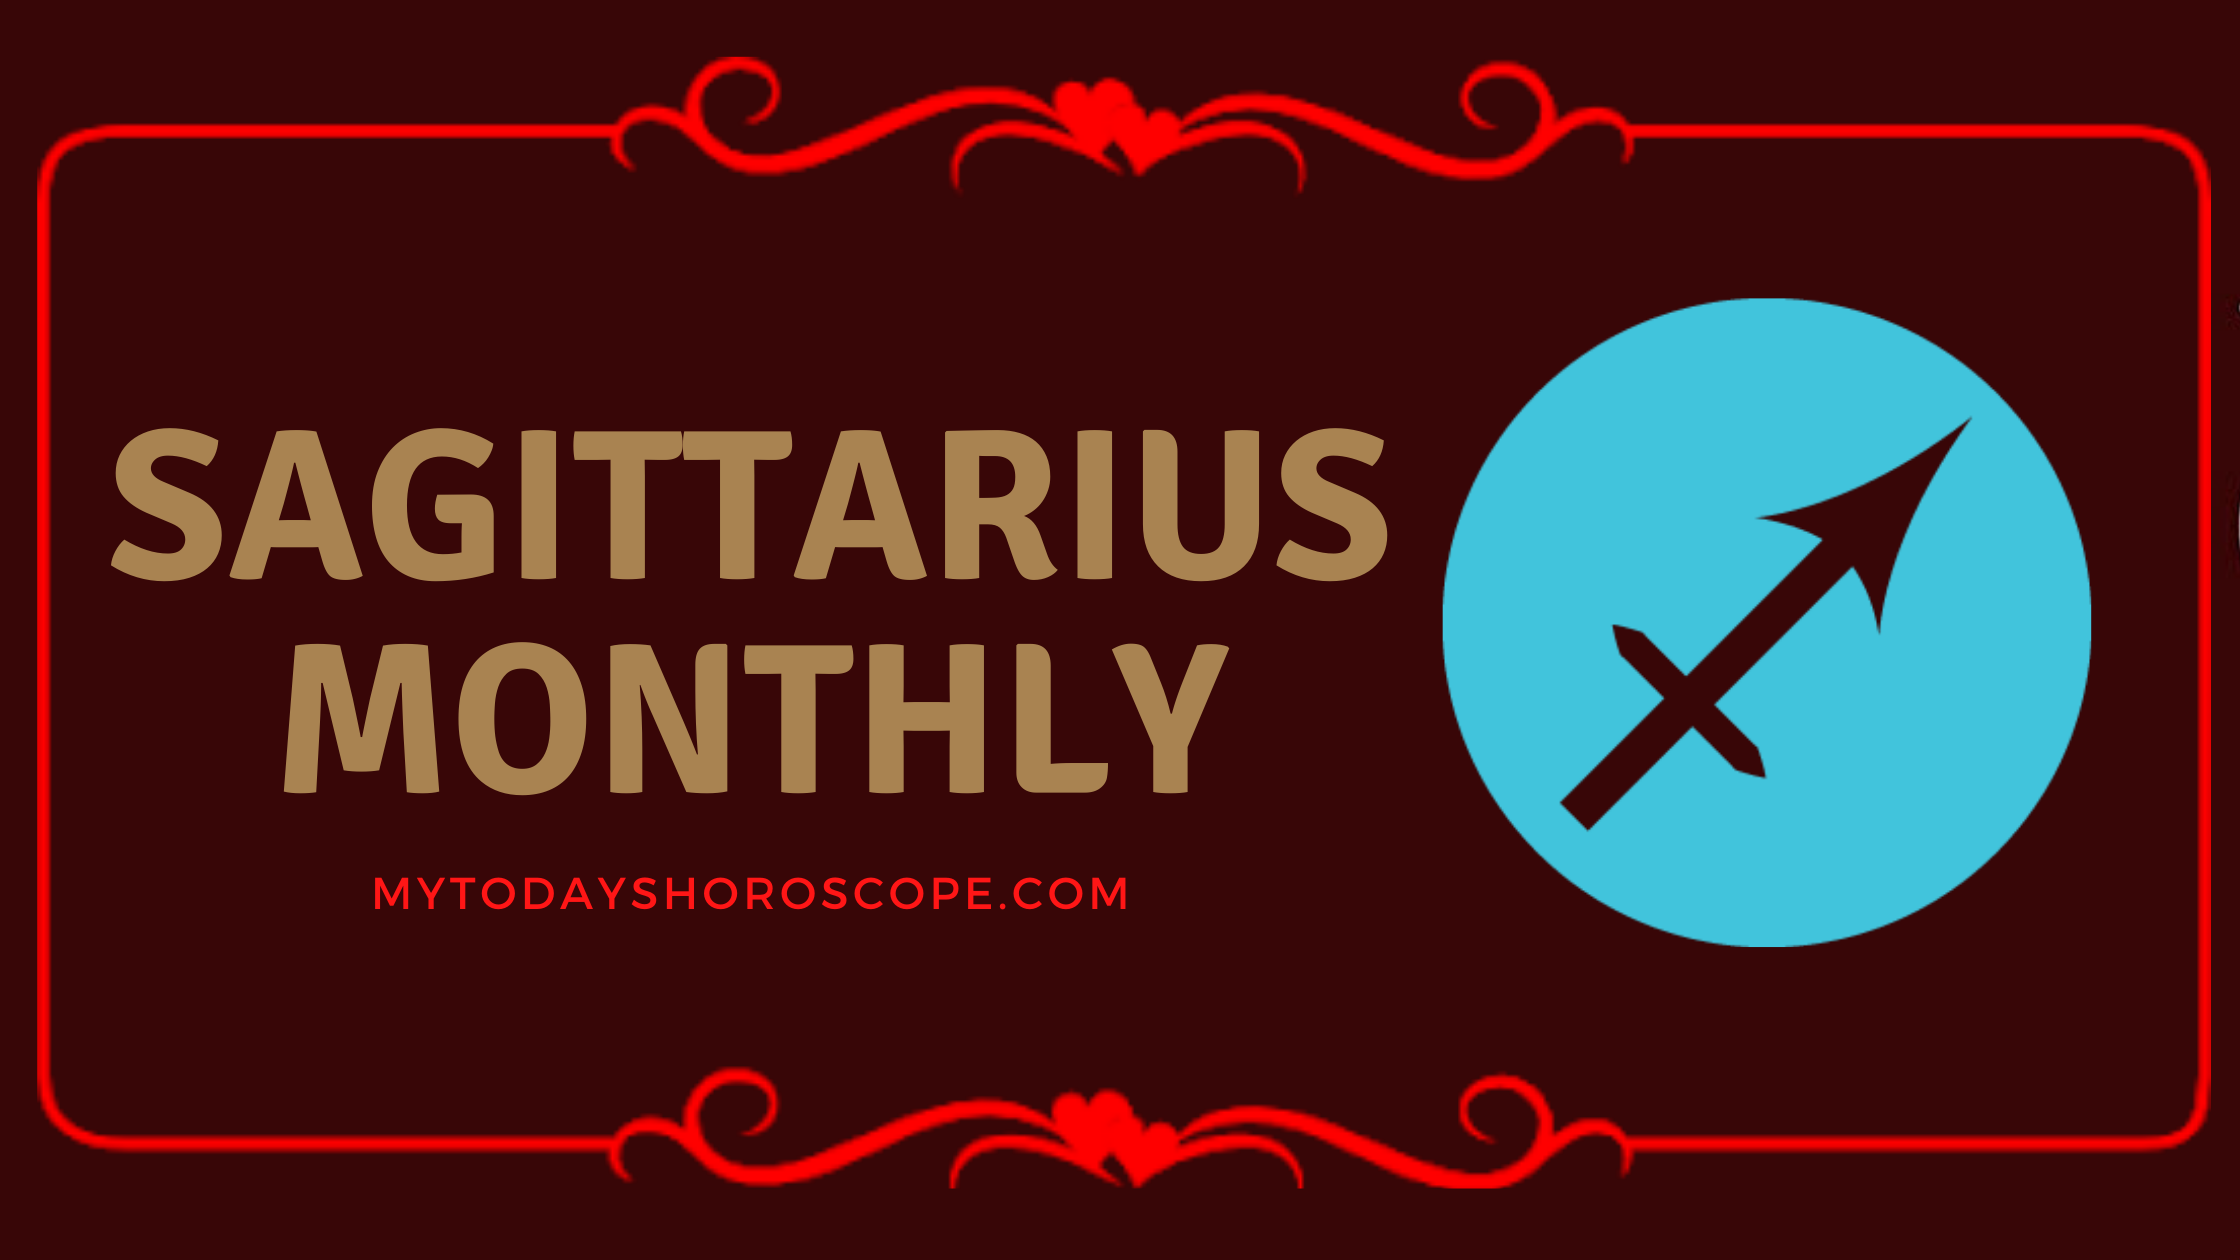 Sagittarius Monthly Love, Work and Well Being Horoscope